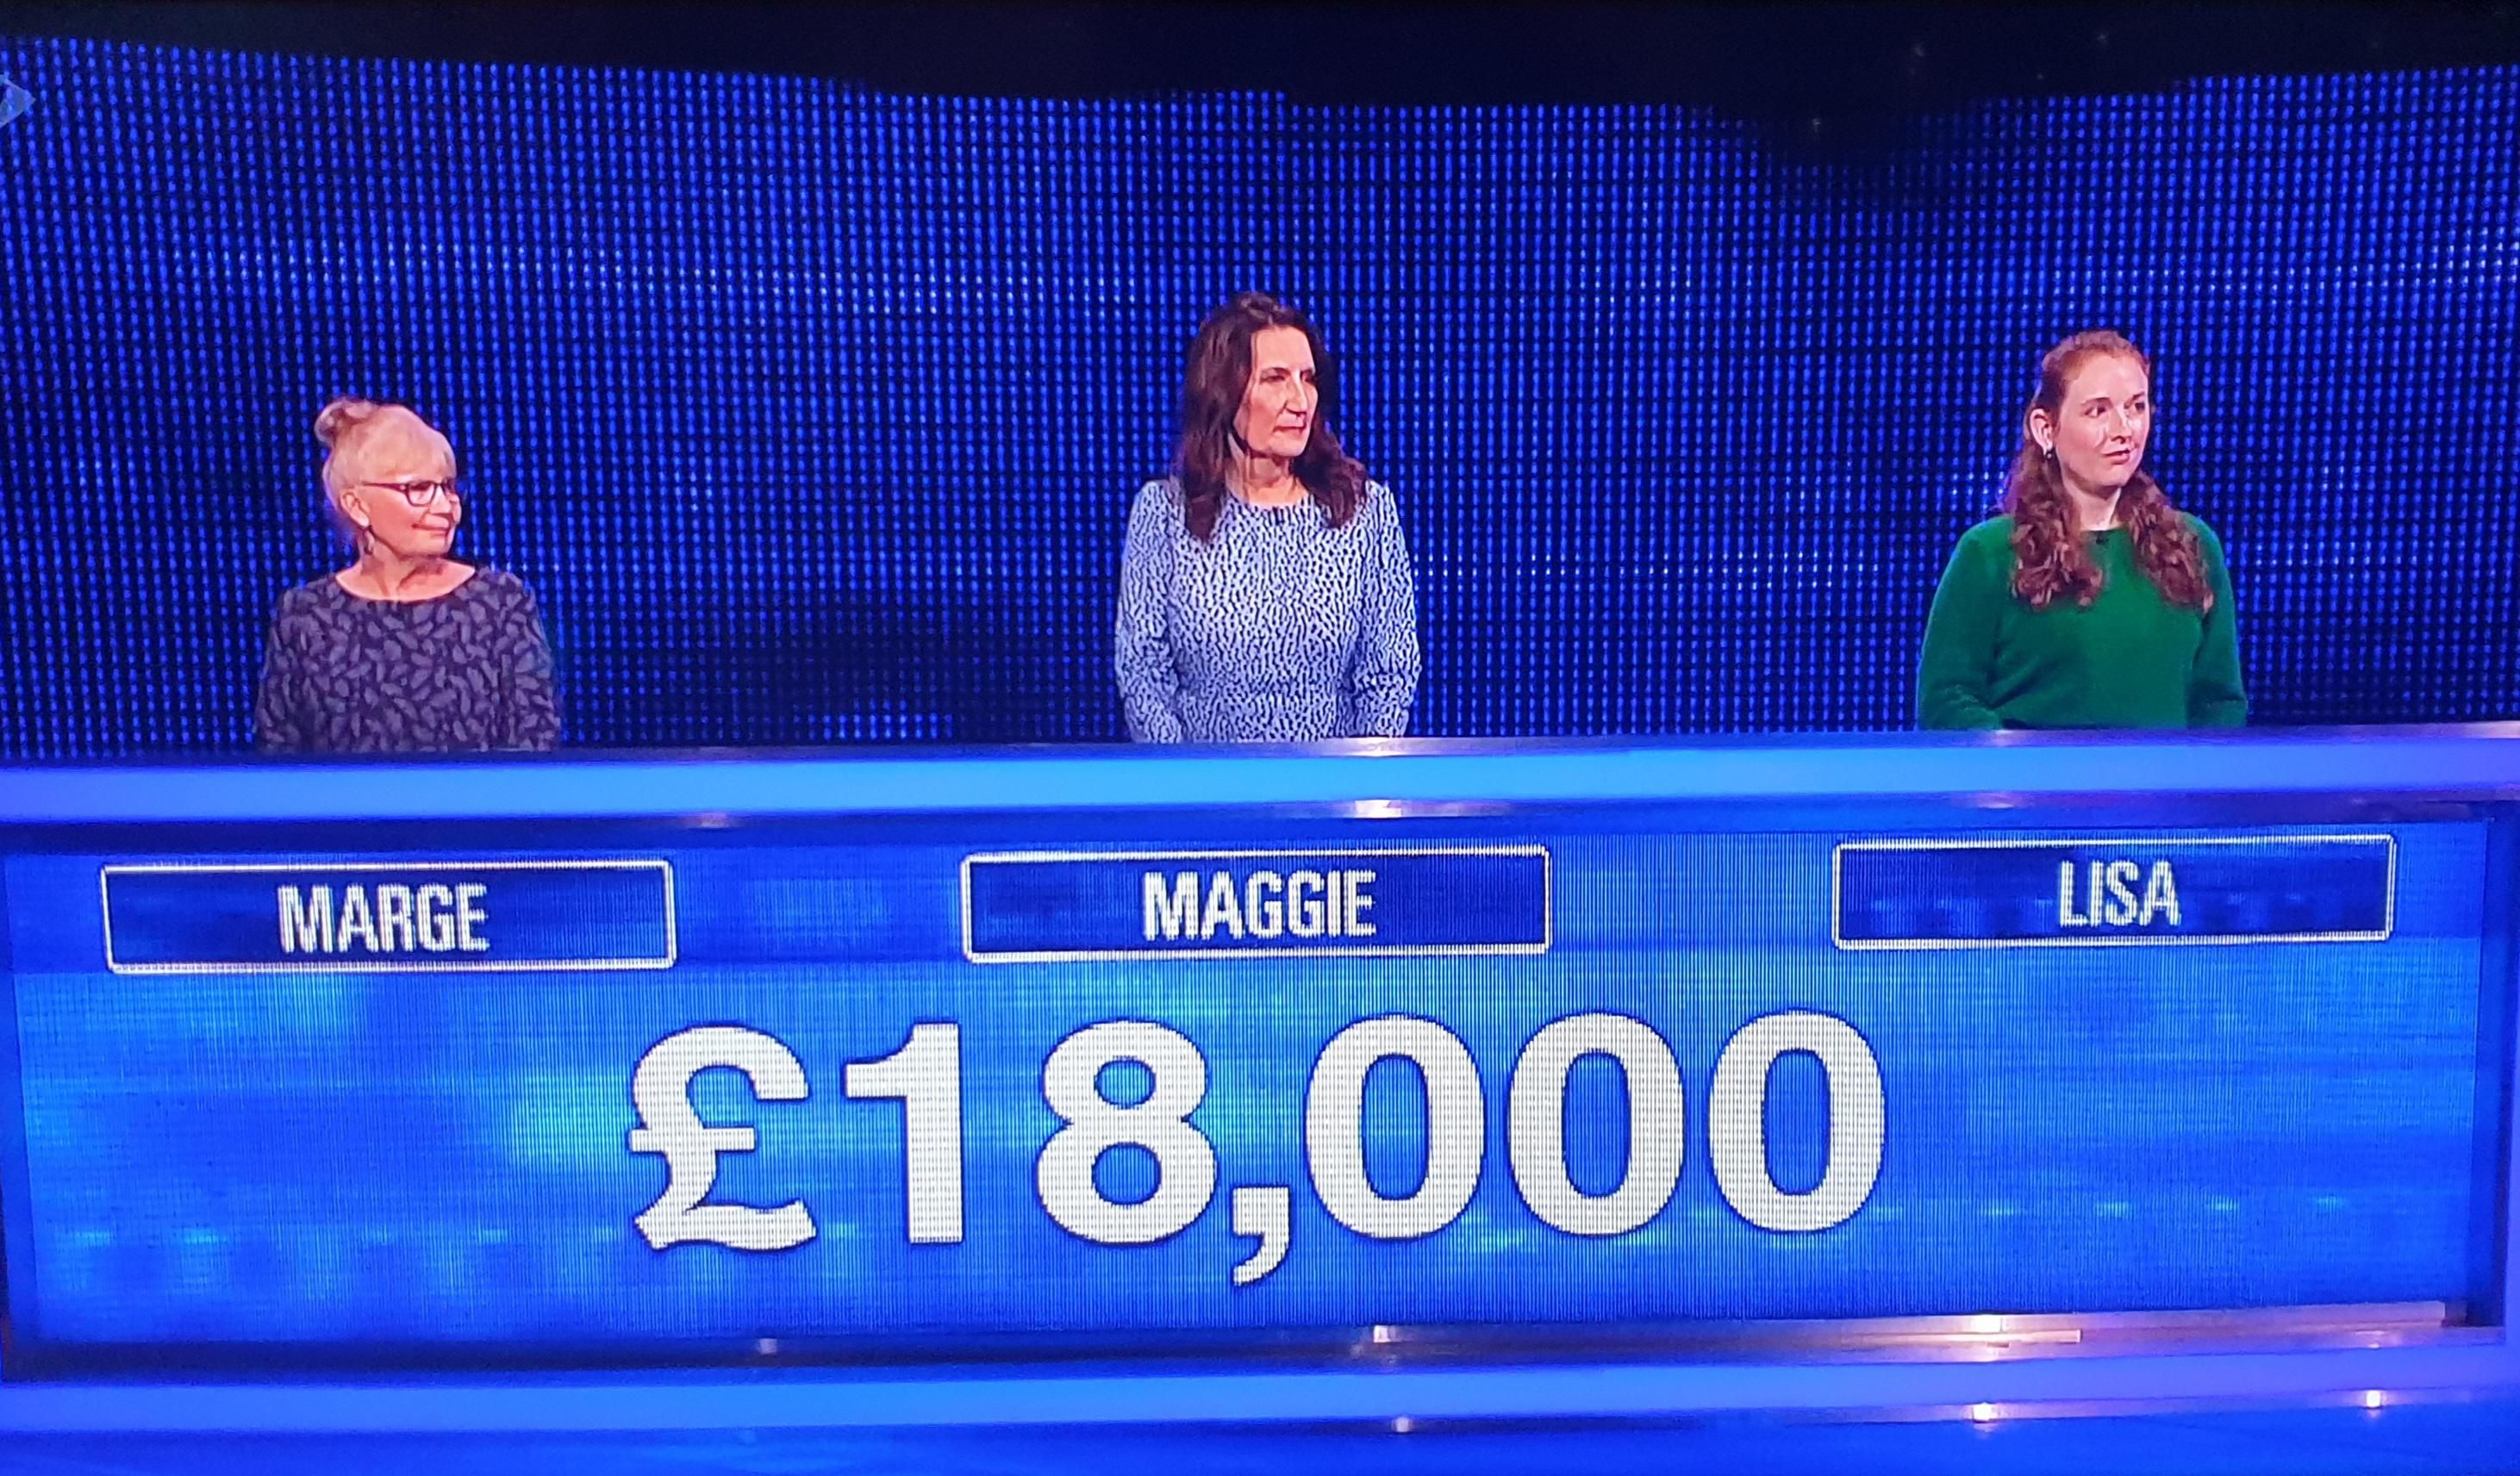 Good luck to the Simpsons on the Chase tonight!